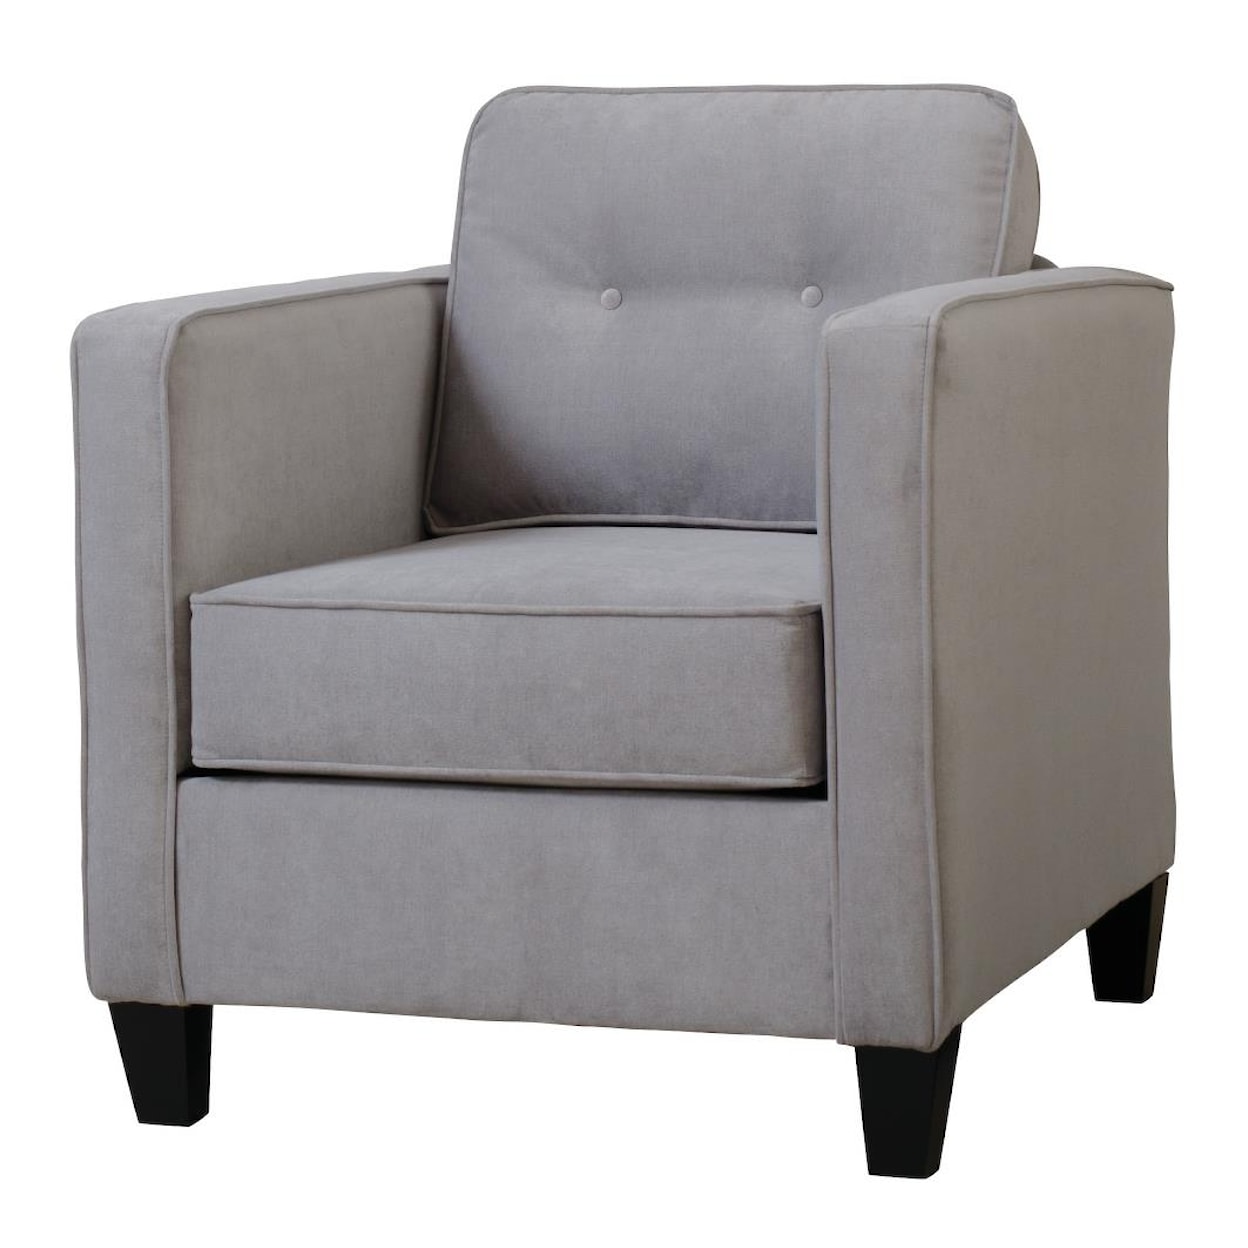 Serta Upholstery by Hughes Furniture 1375 Chair